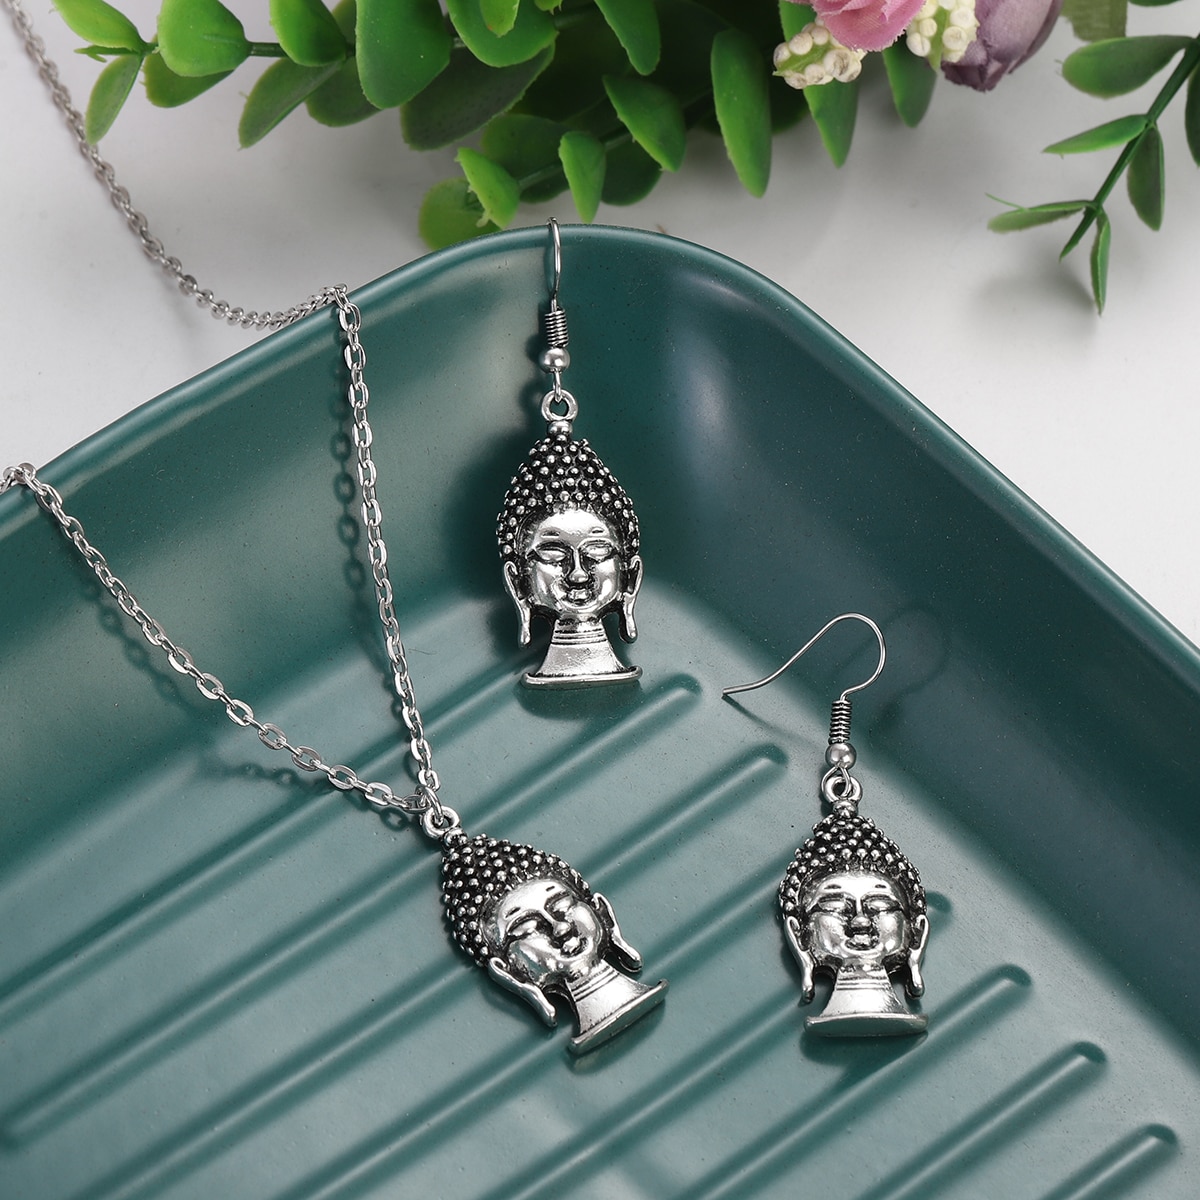 Vintage-Ethnic-Silver-Color-Buddha-Necklace-Set-Women-Alloy-Carved-Buddha-Lucky-Amulet-Jewelry-Sets--1005004970504388-5